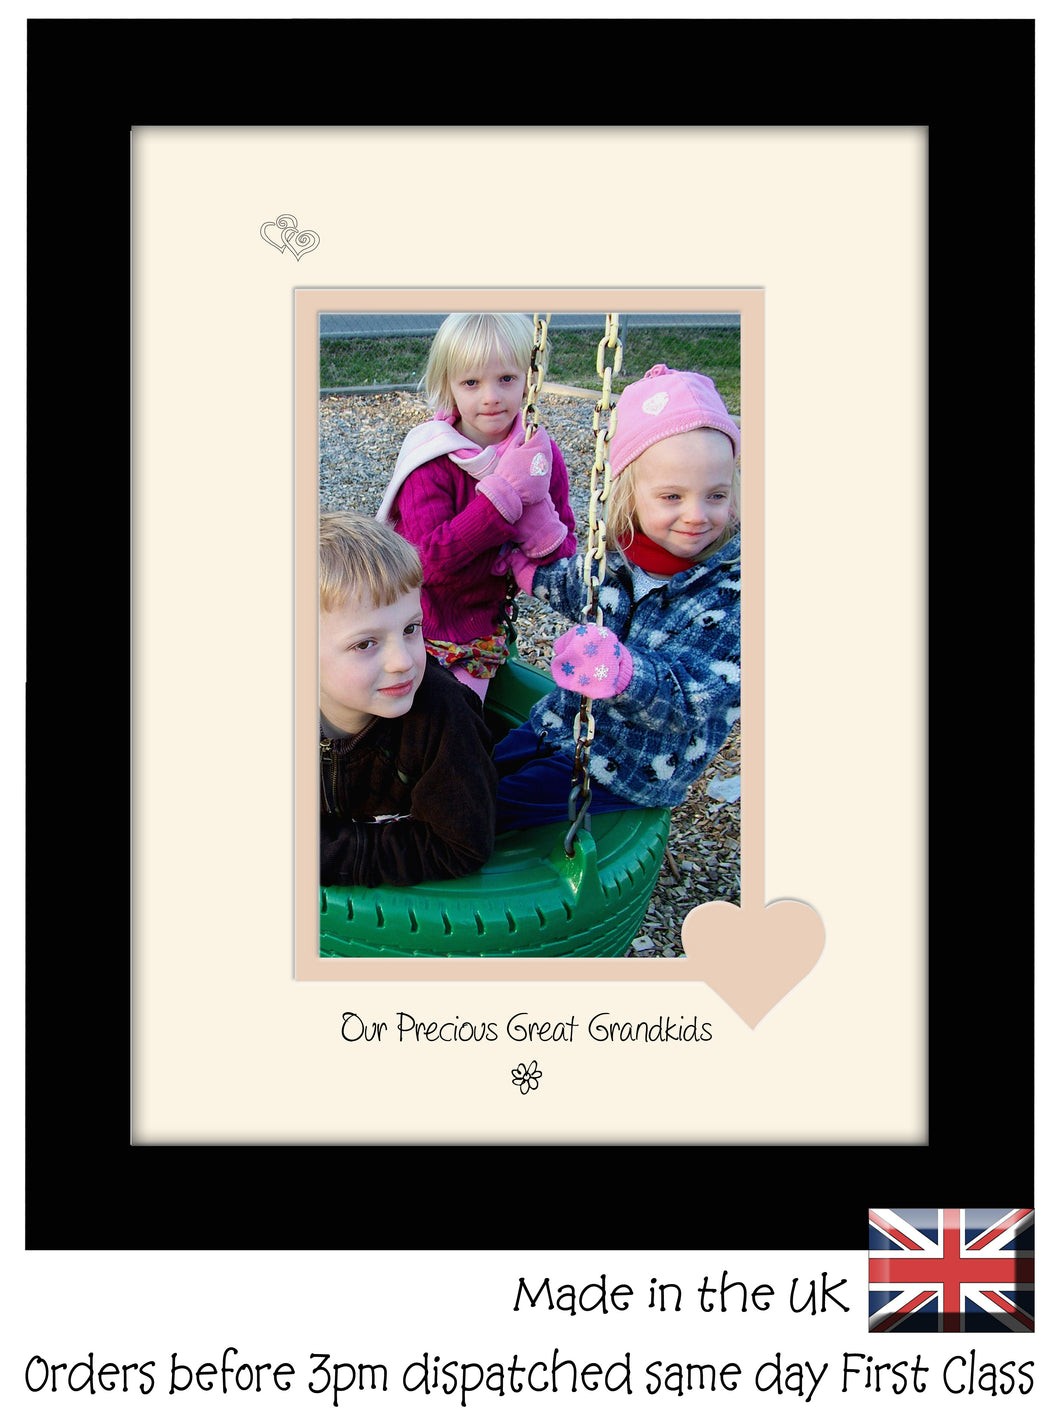 Great Grandkids Photo Frame - Our precious Great Grandkids Portrait photo frame 6